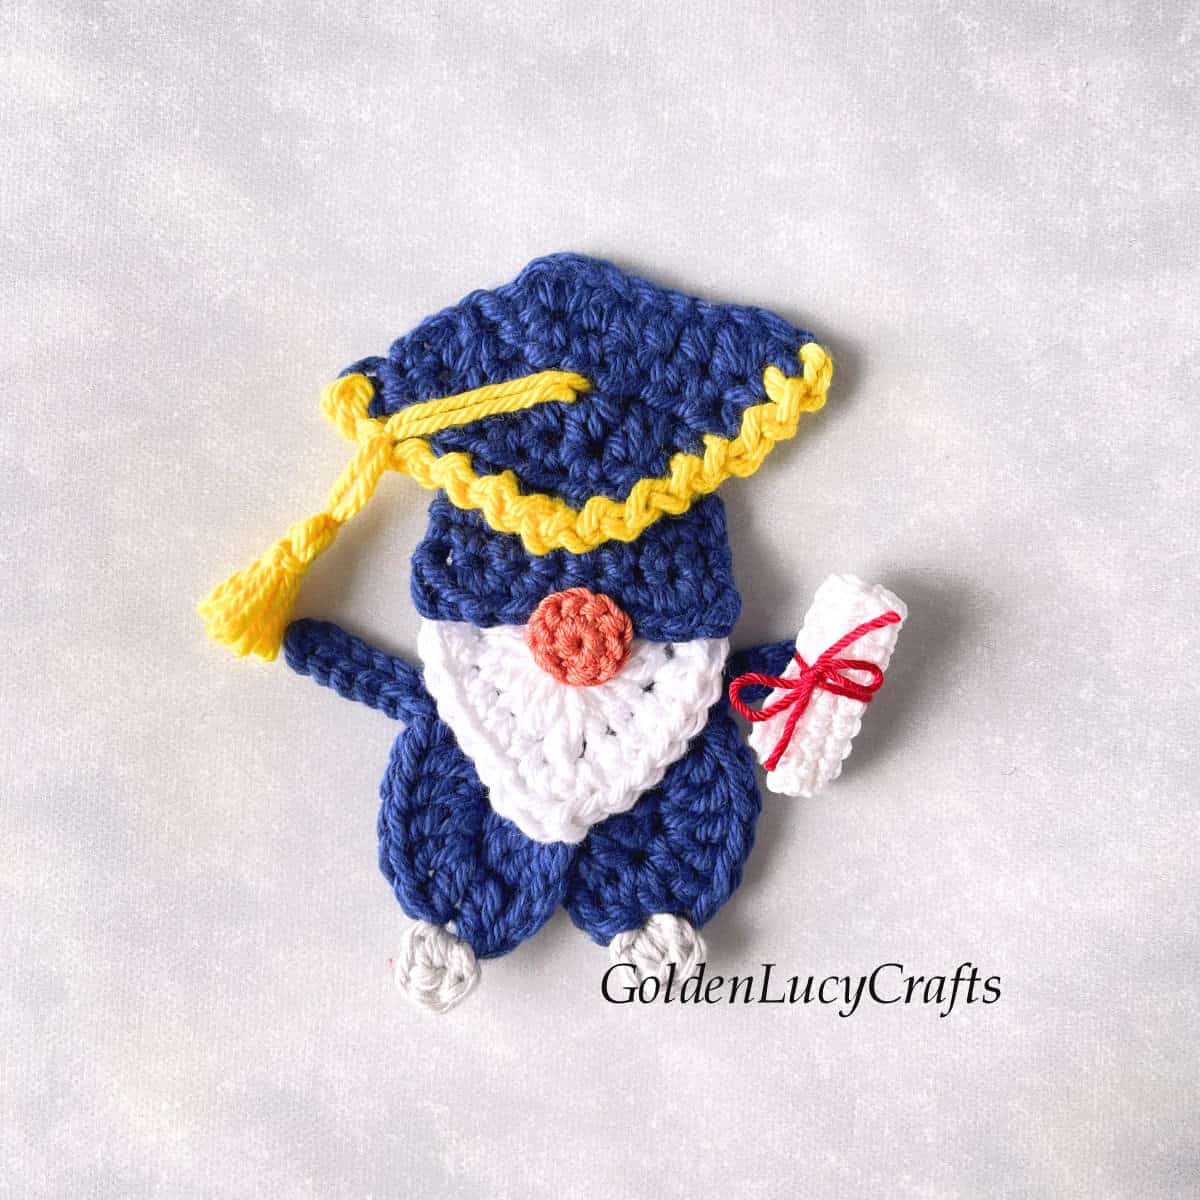 Crochet graduation gnome with diploma scroll.